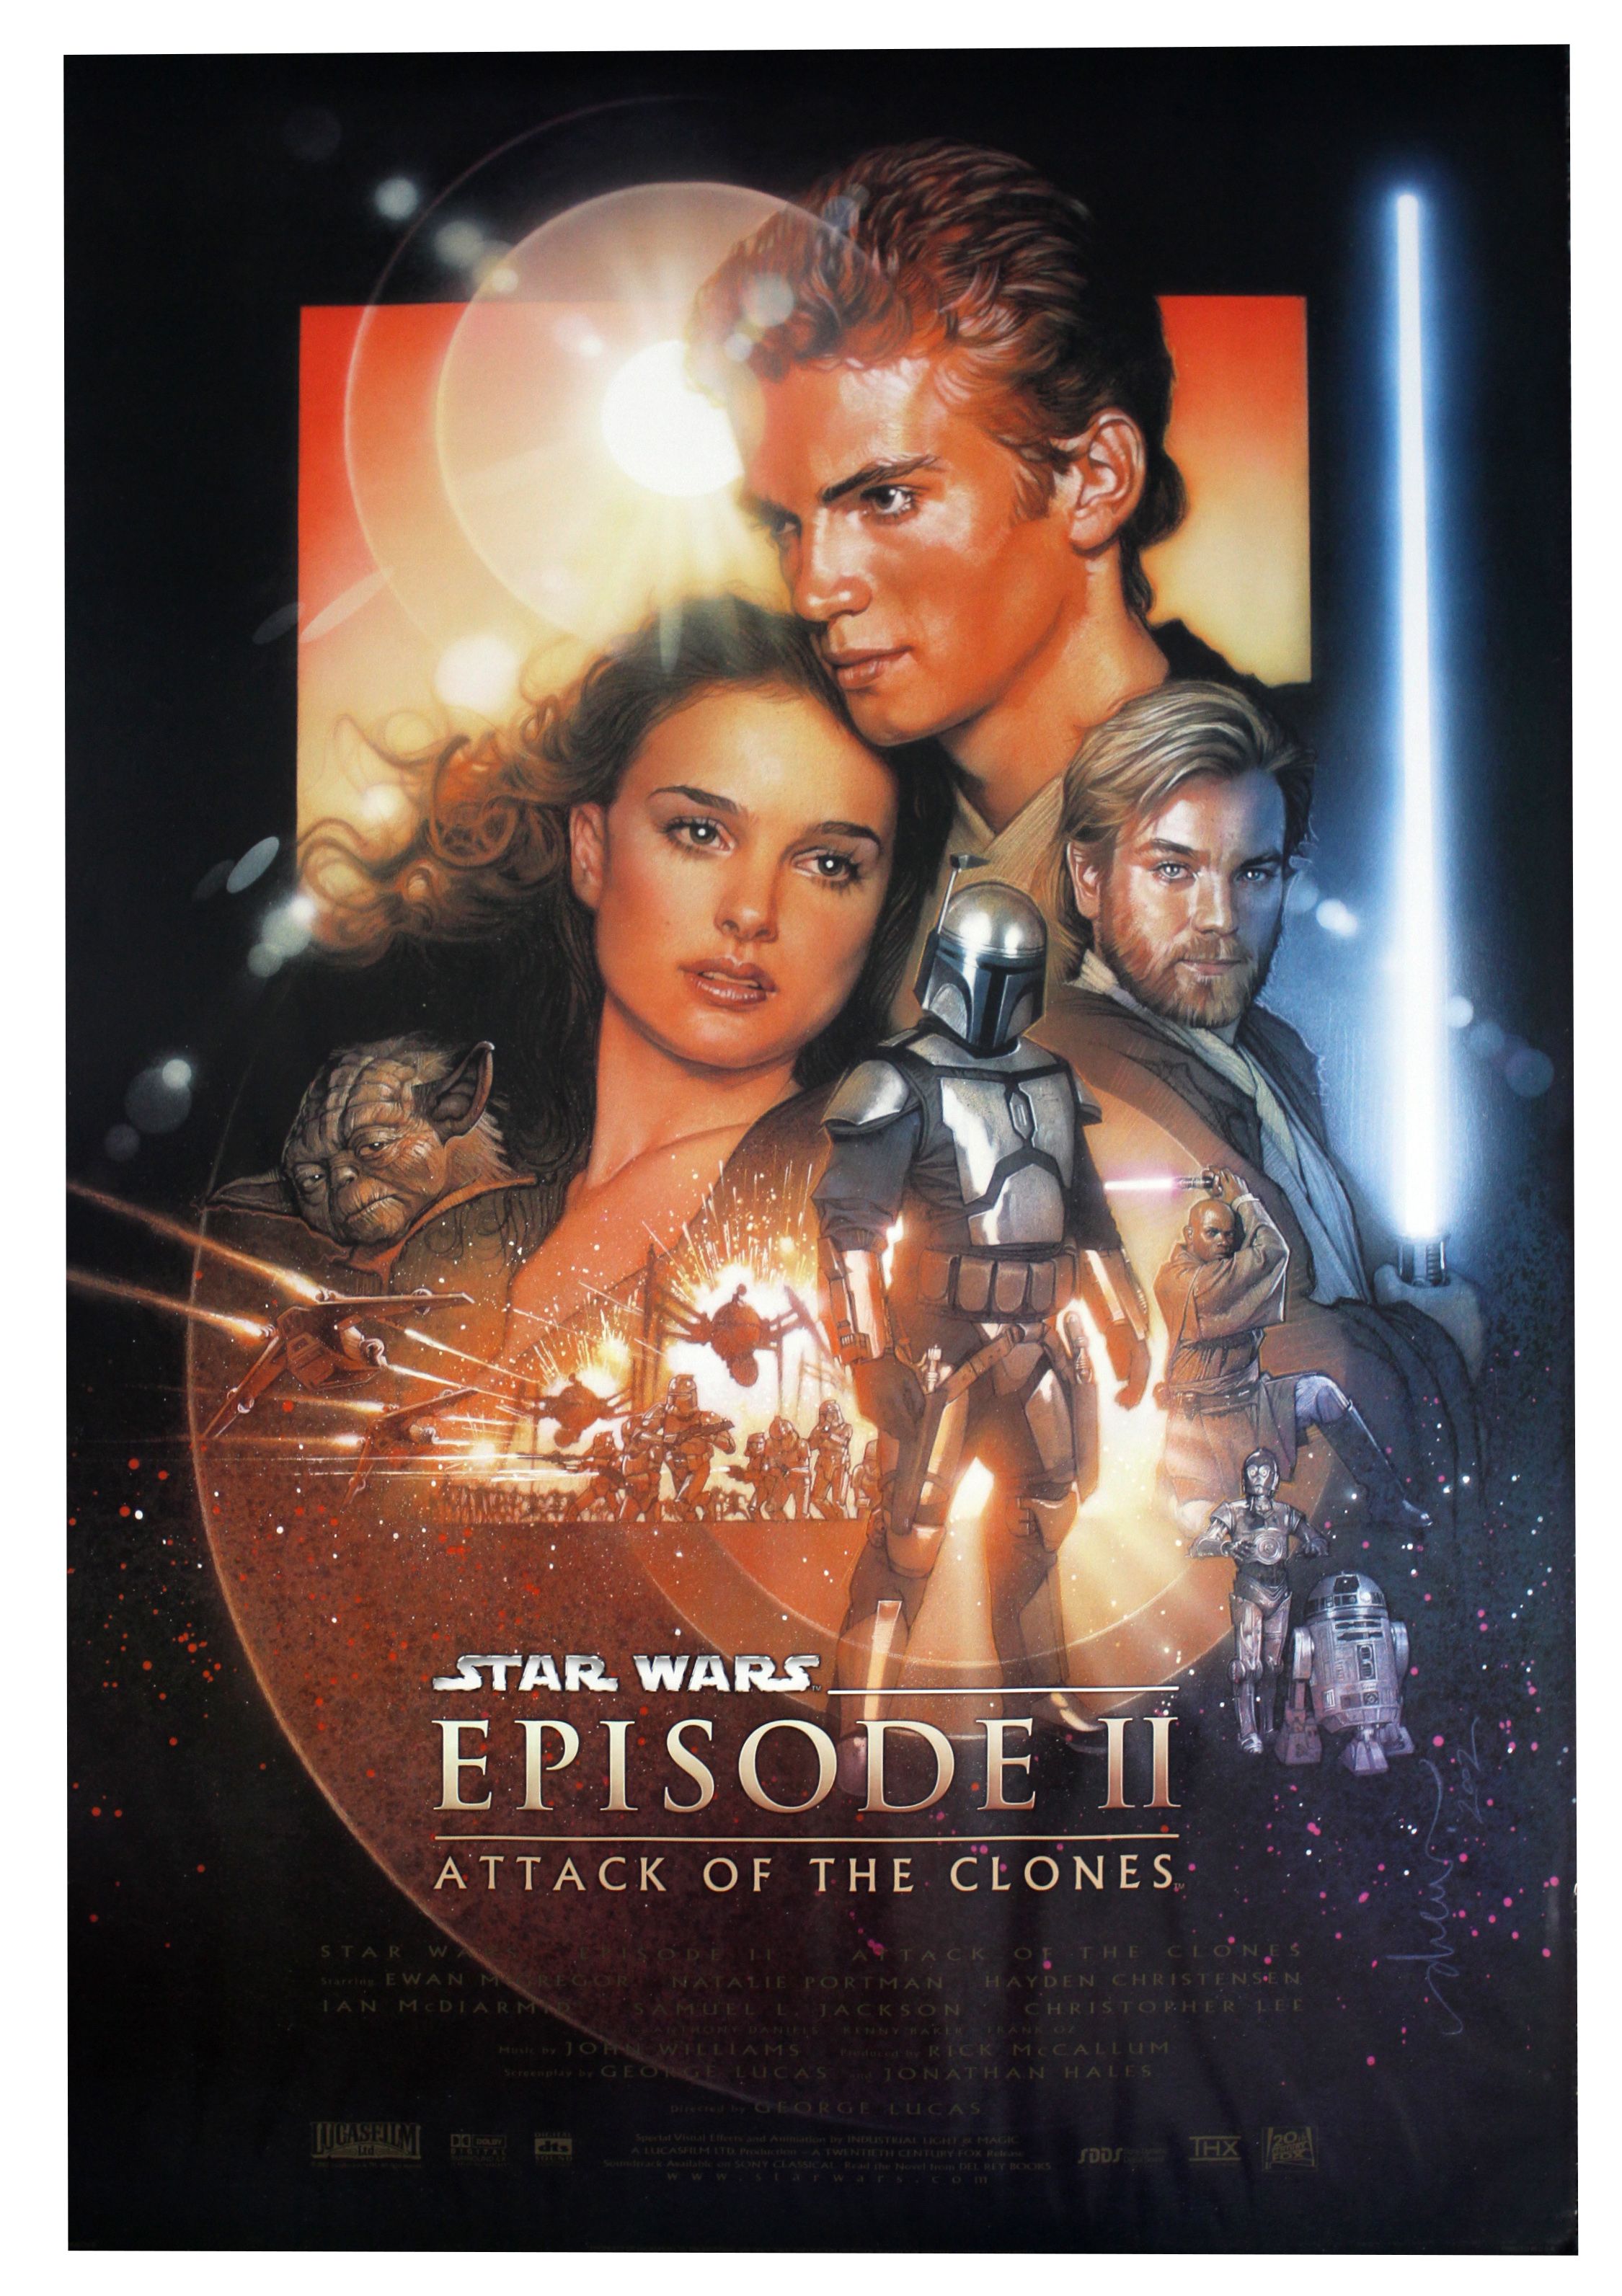 attack-of-the-clones-poster-1-05032015